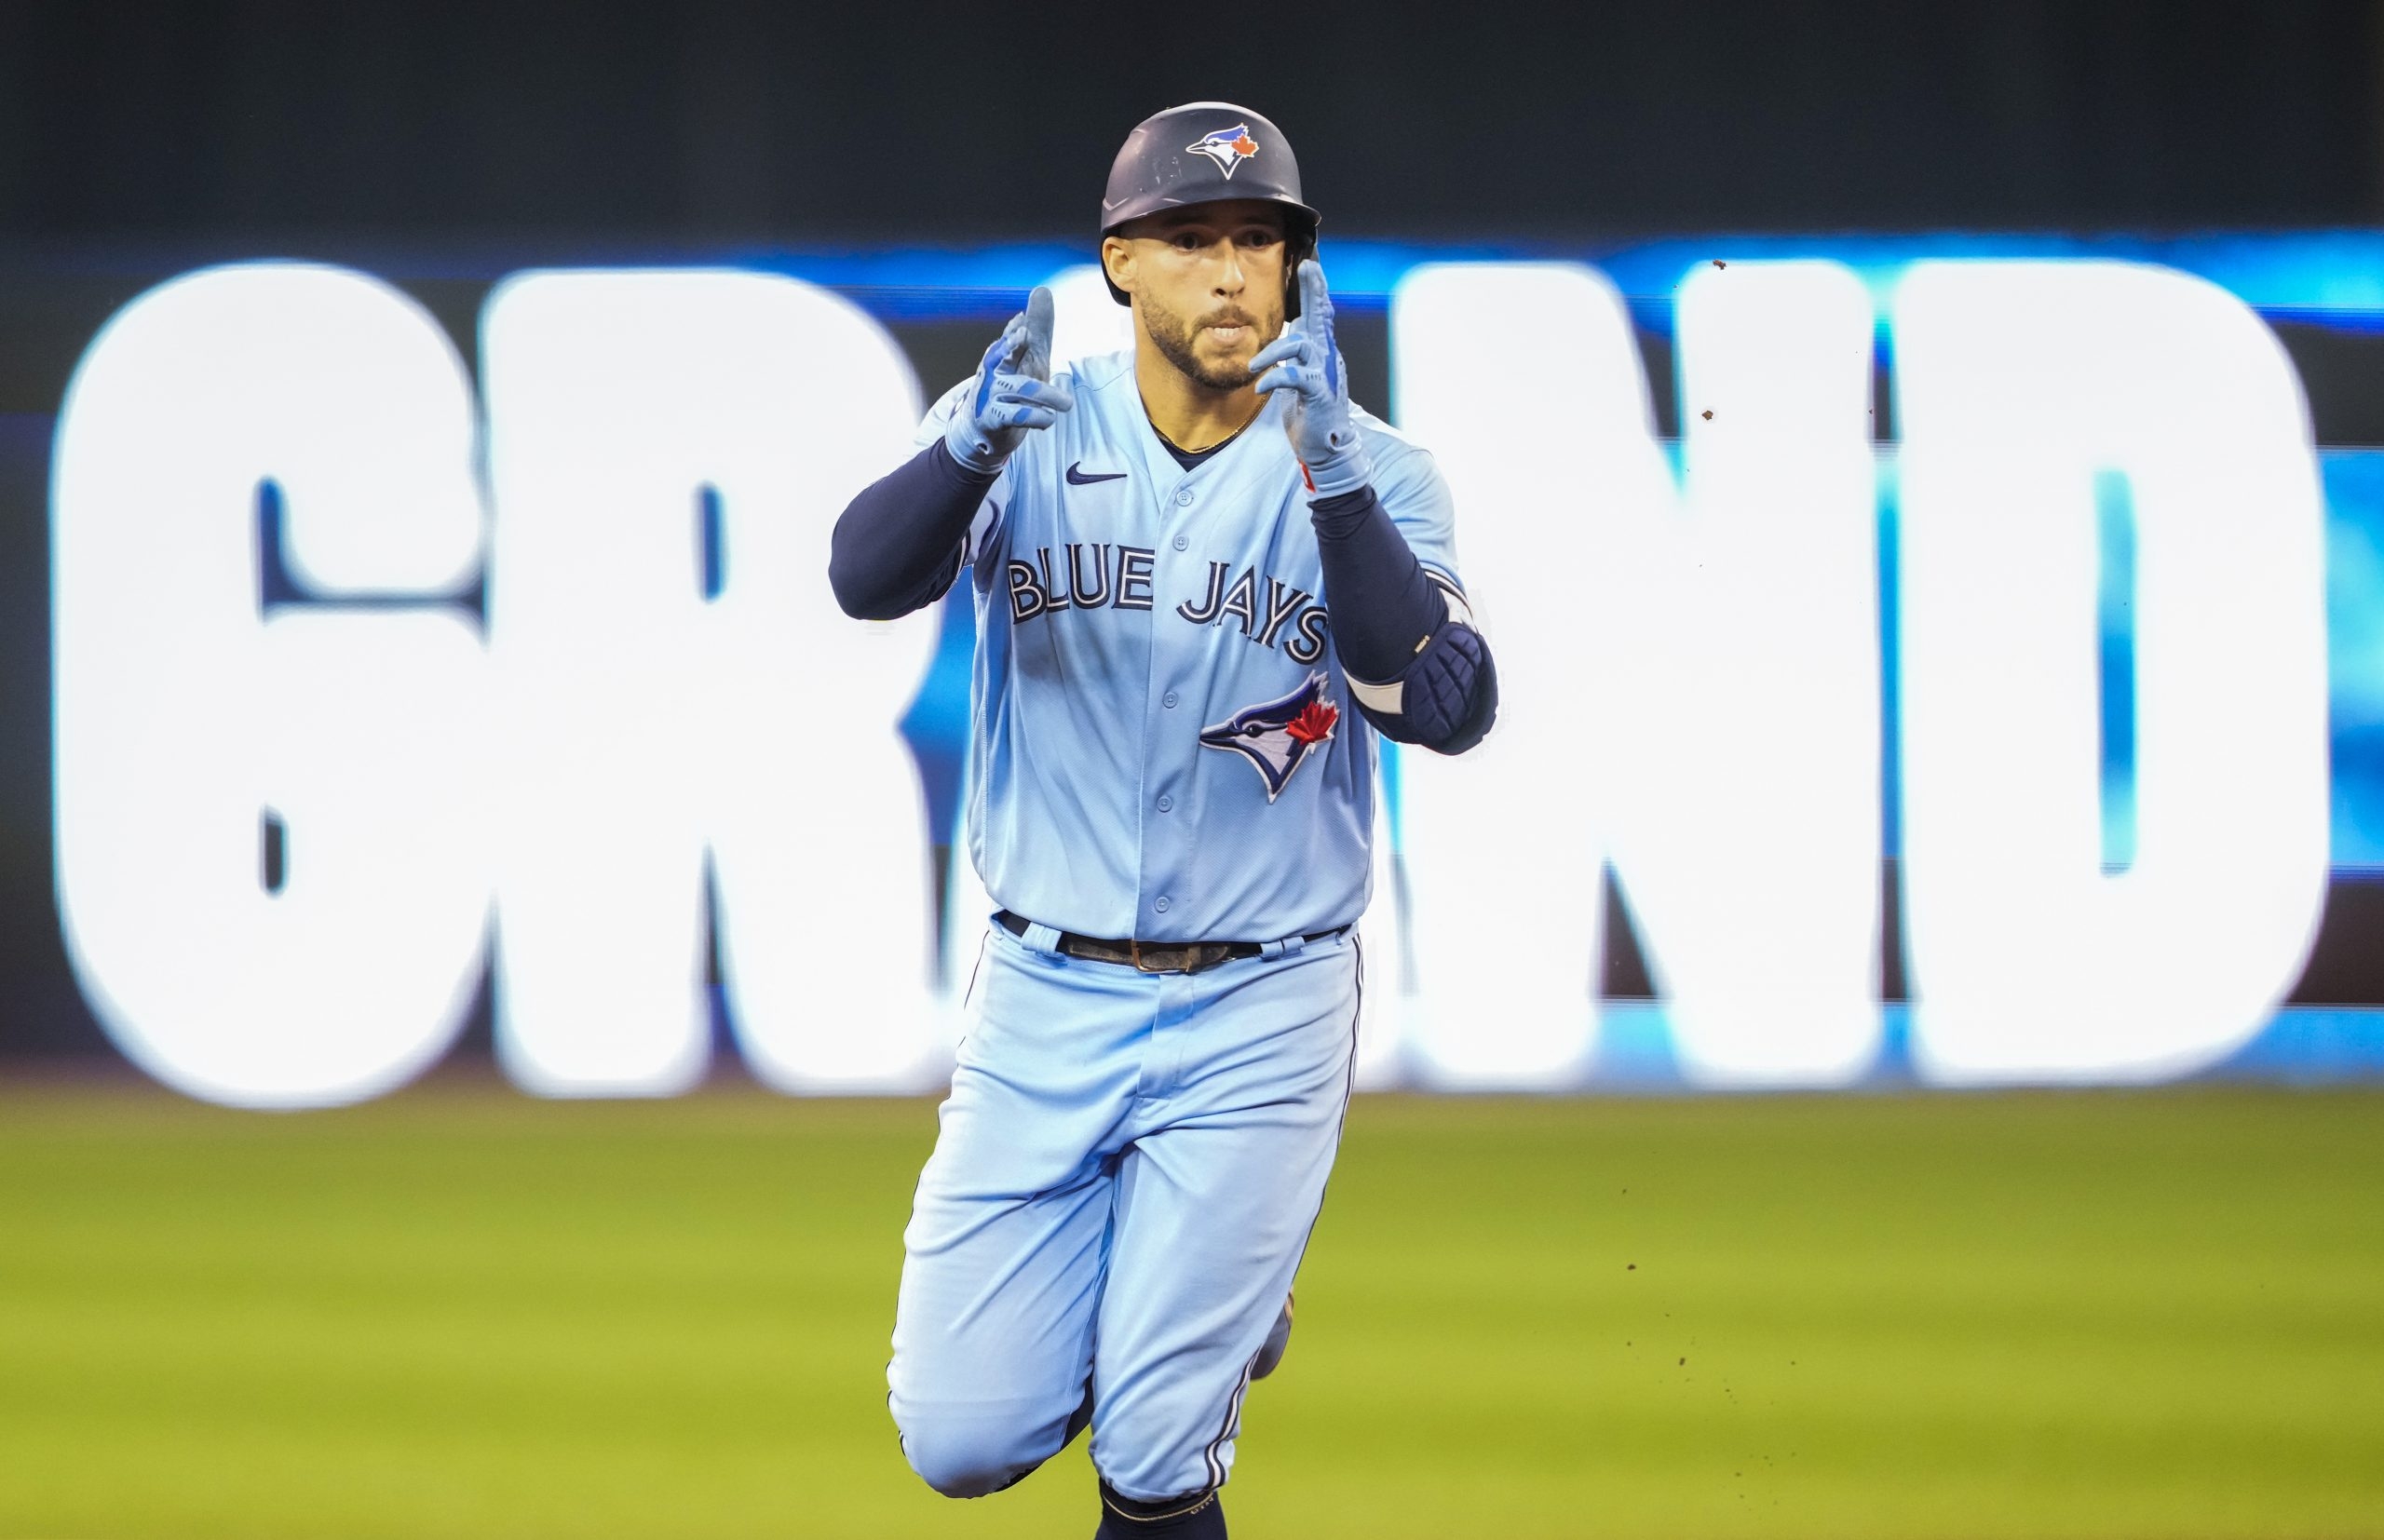 Toronto Blue Jays: George Springer's impact keeping team in contention